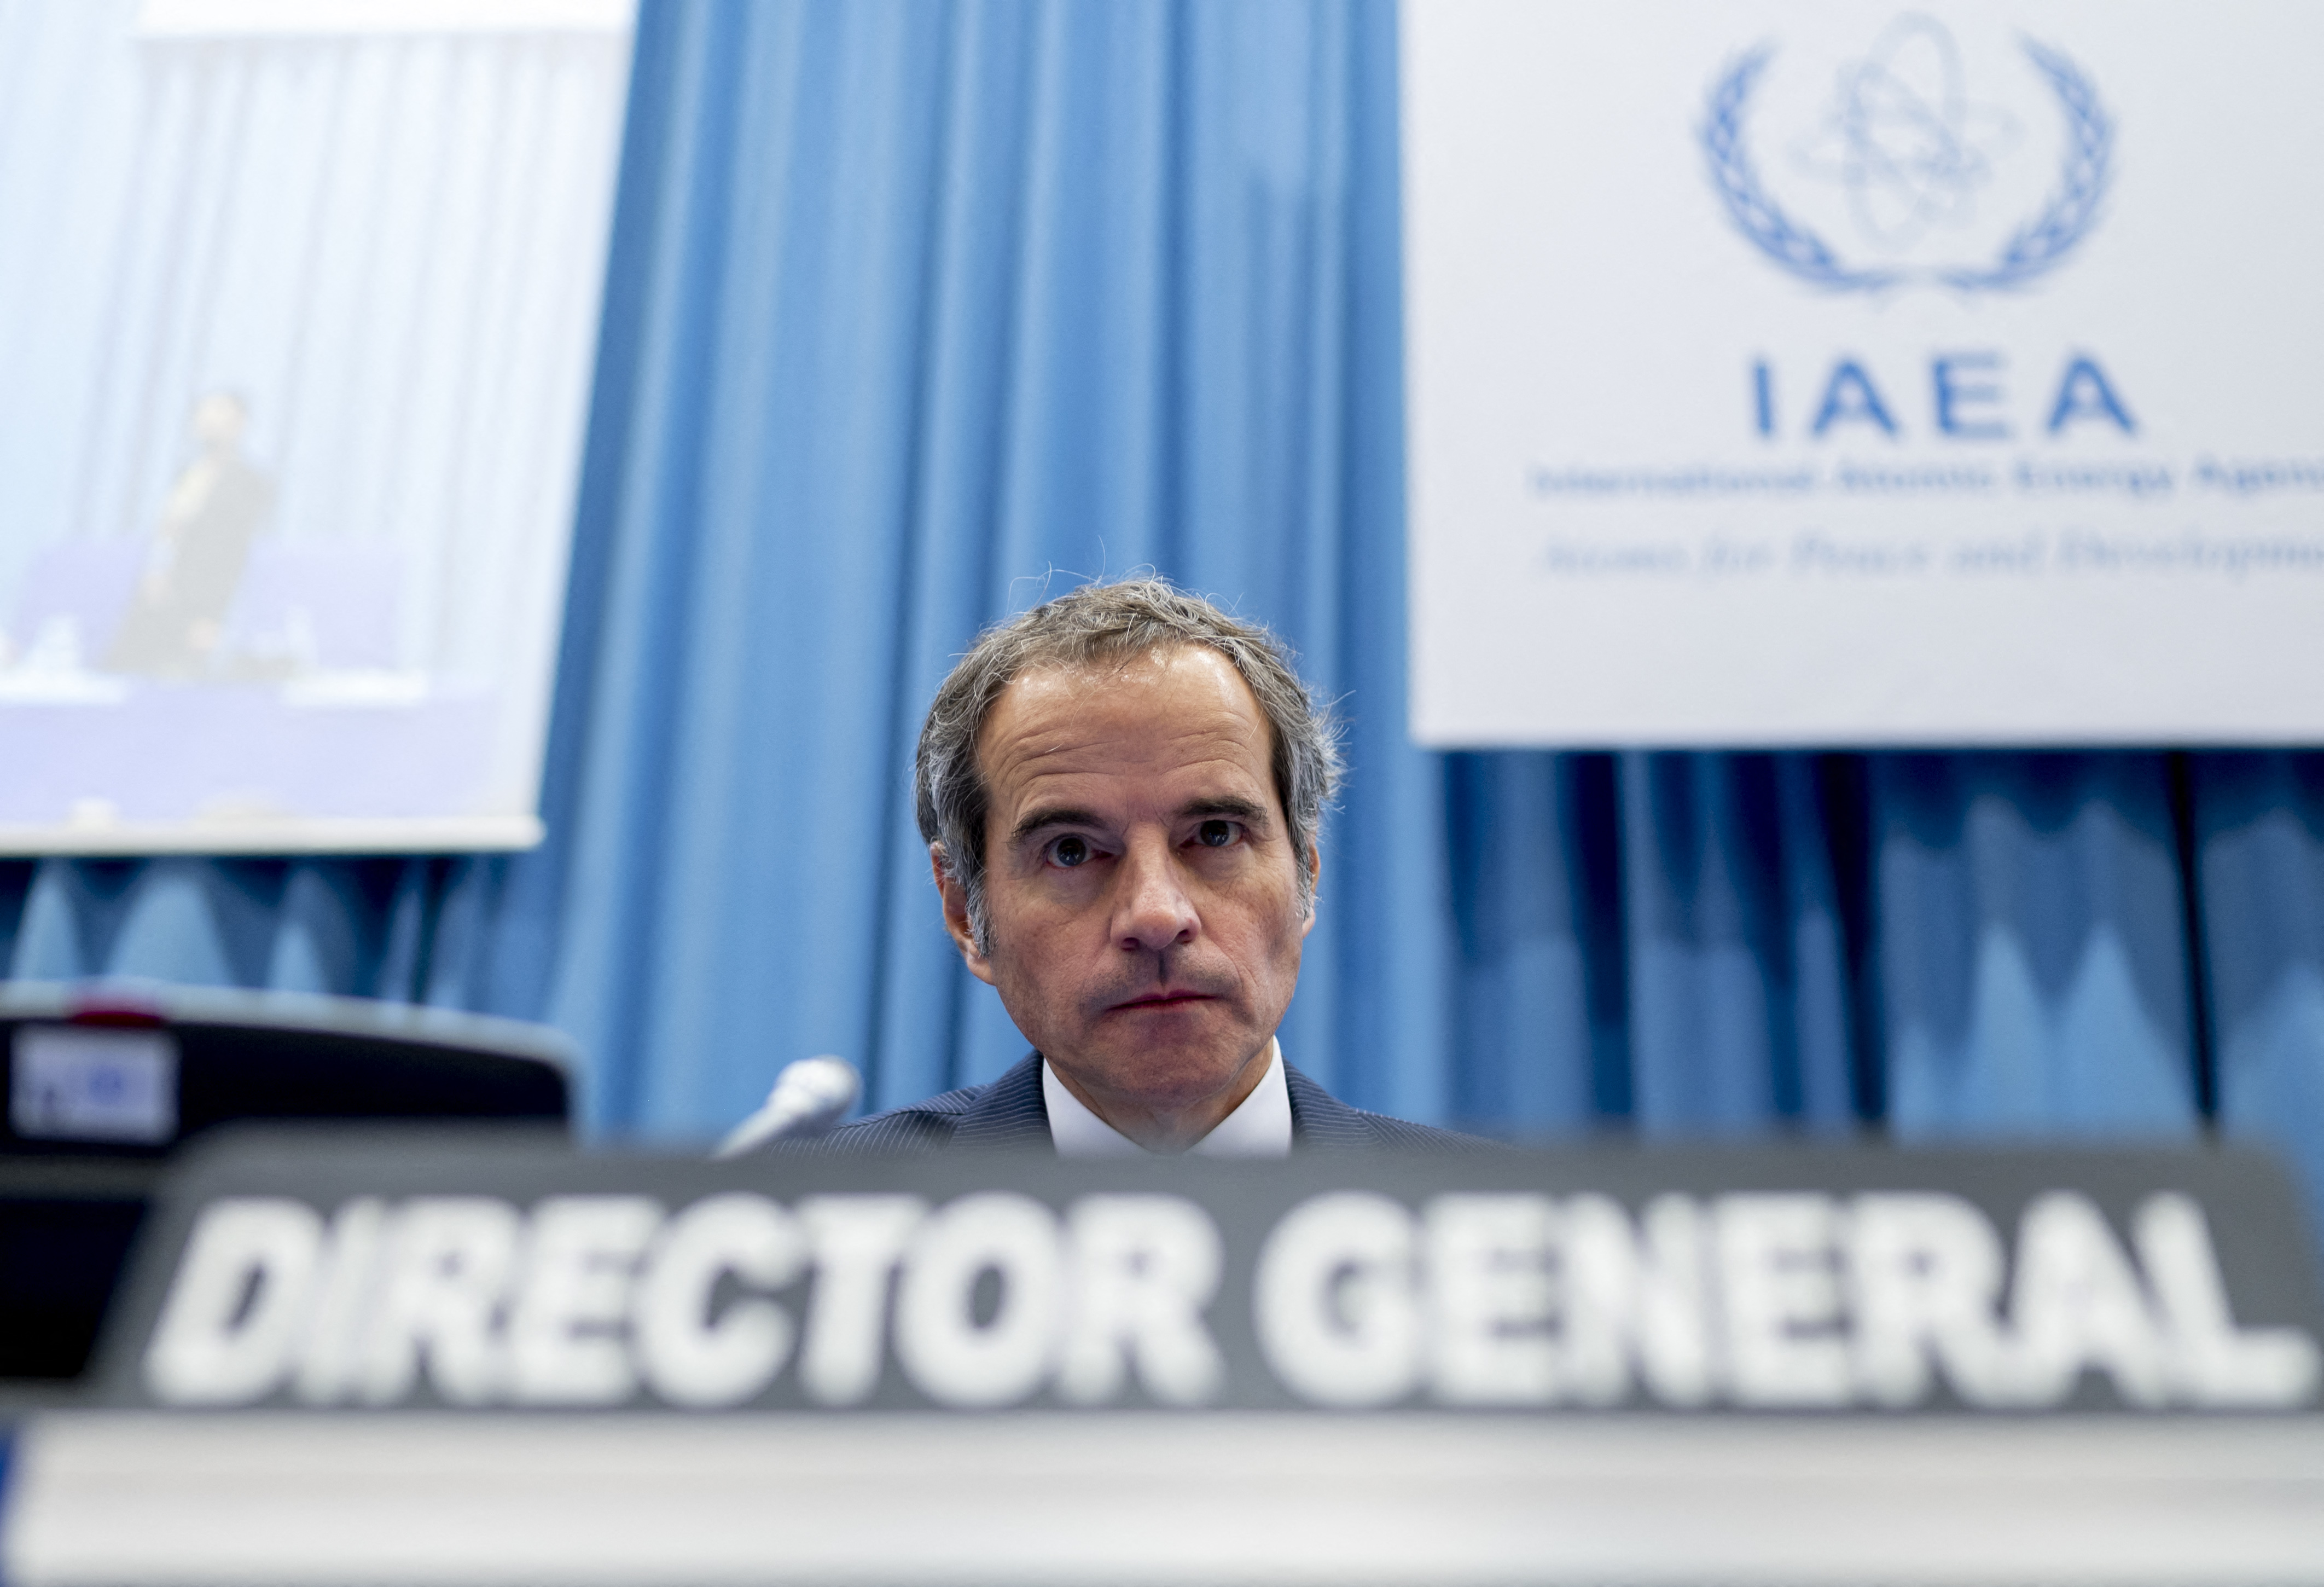 Director General of the International Atomic Energy Agency (IAEA) Rafael Grossi is seen at the IAEA headquarters in Vienna, Austria, on March 7. 